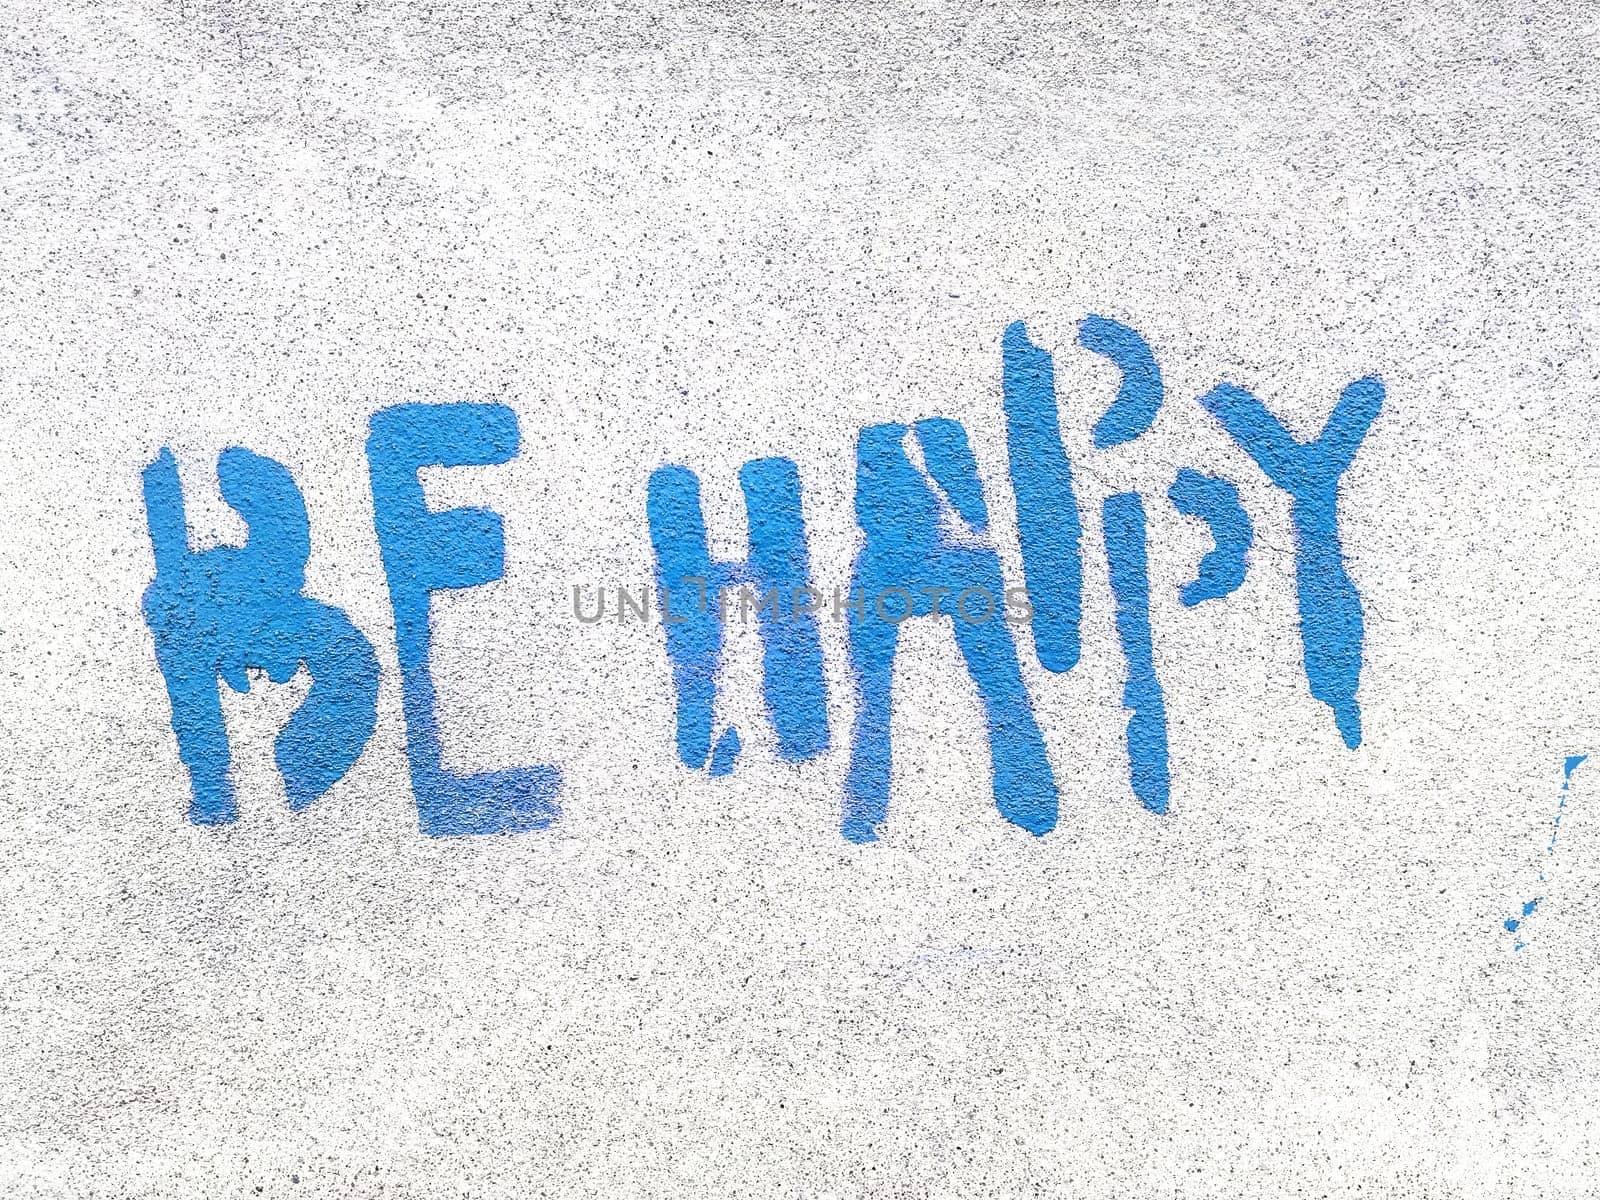 Blue Be Happy written in graffiti style with rough texture isolated on gray background.